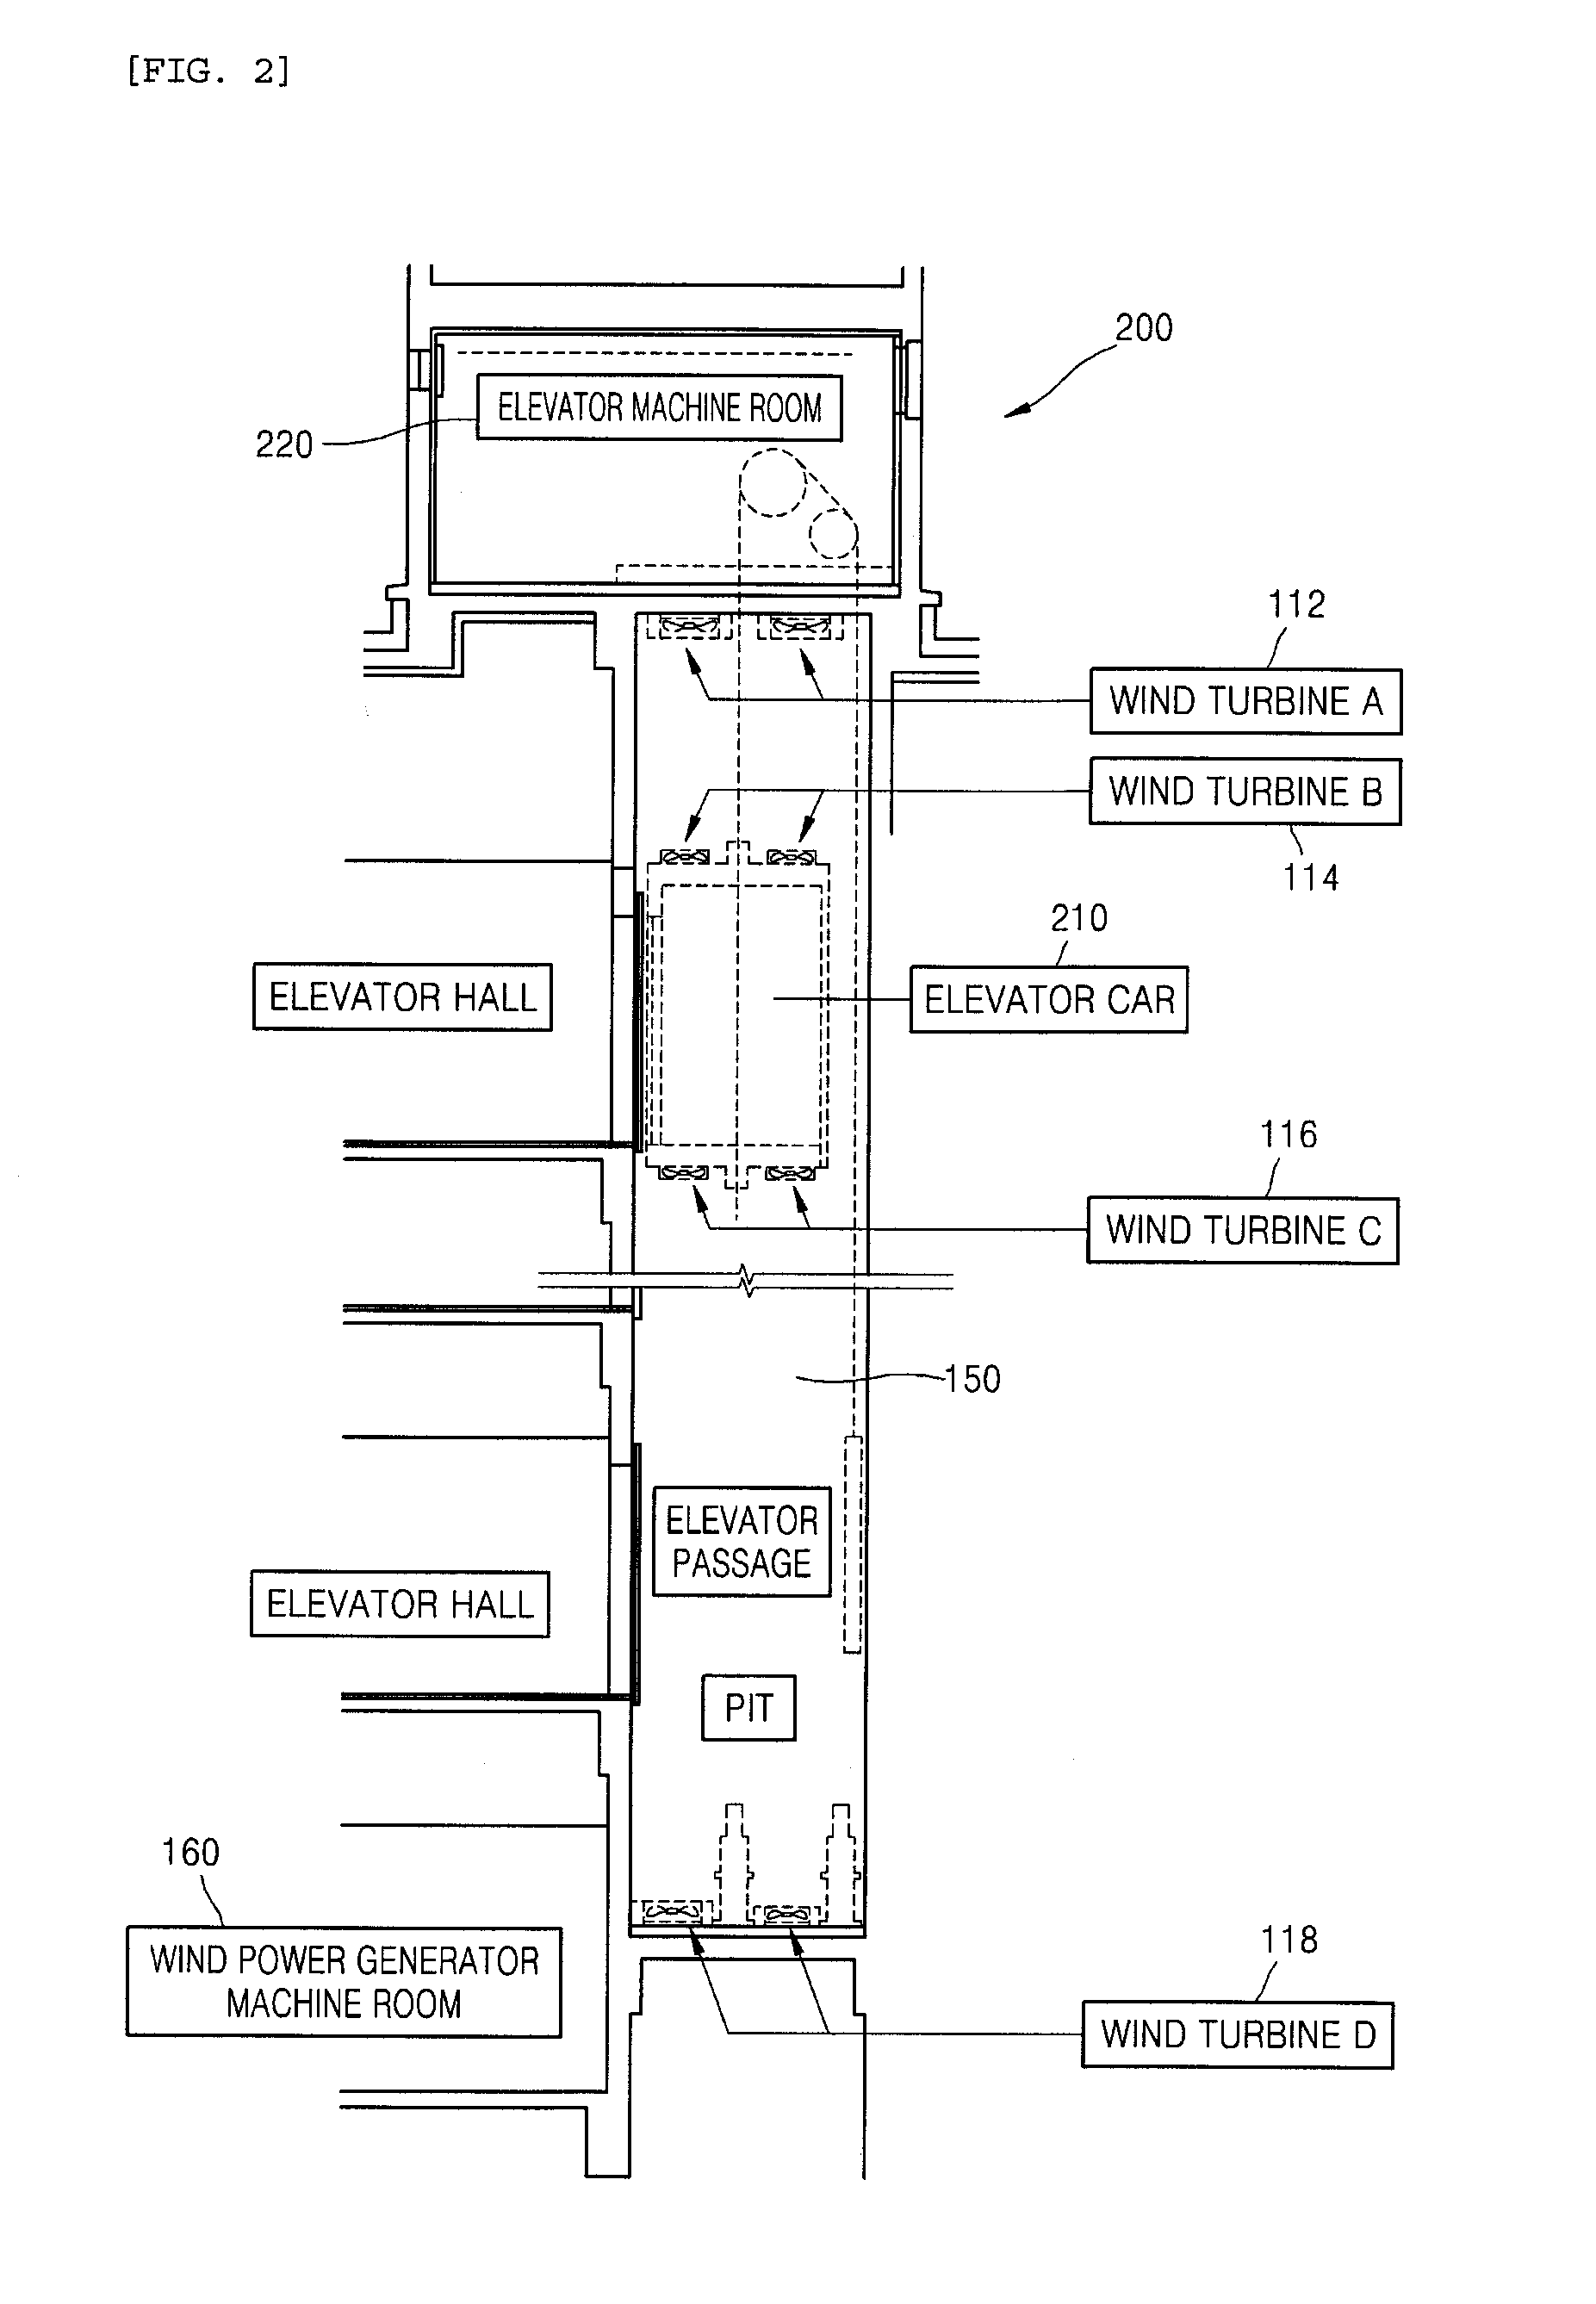 Wind power generation system and method using stack effect of high-speed elevator in high-rise building